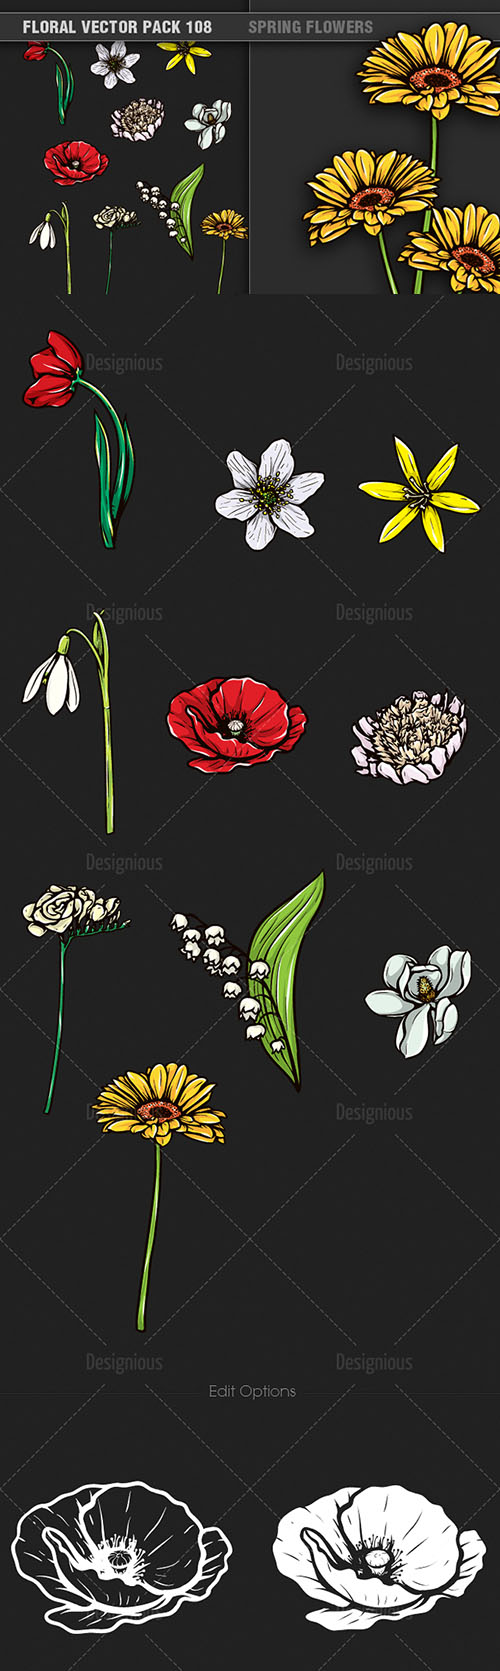 Spring Flowers Vector Illustrations Pack 108